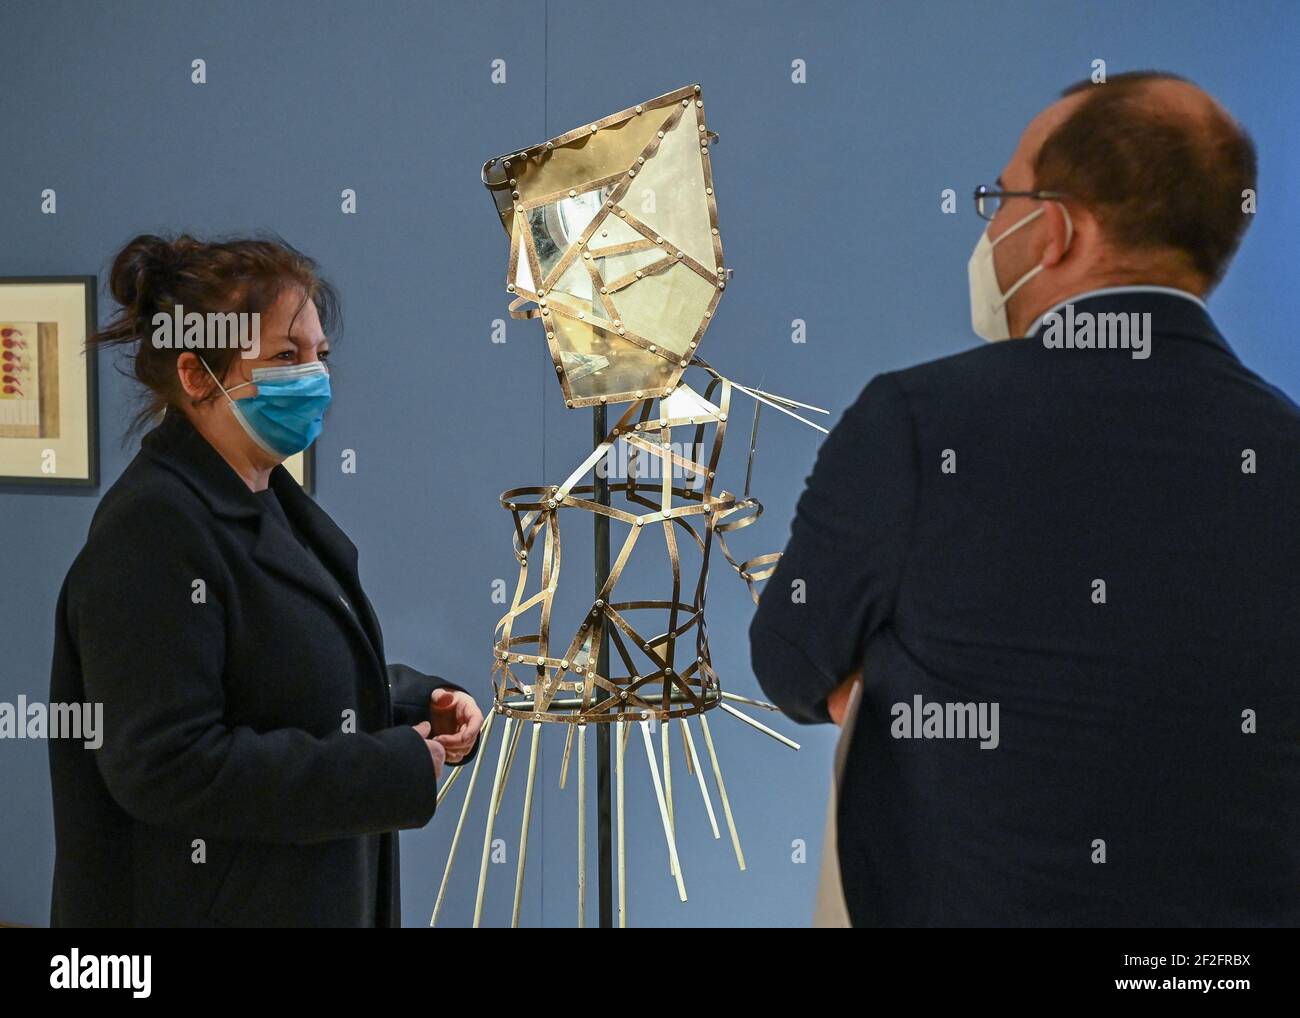 12 March 2021, Brandenburg, Frankfurt (Oder): Ulrike Kremeier, Director of the Brandenburg State Museum of Modern Art (BLMK), and Tobias Dünow, State Secretary for Science, Research and Culture of the State of Brandenburg, talk in front of the object 'The Newscaster' from 1989 by the artist Verena Kyselka. The BLMK took the first opportunity after 18 weeks of corona-related 'forced break' and has opened its doors to visitors again since 09.03.2021. The special opening hours at the locations in Cottbus and Frankfurt (Oder) are Tuesdays to Sundays from 12 to 18 o'clock. Photo: Patrick Pleul/dpa- Stock Photo